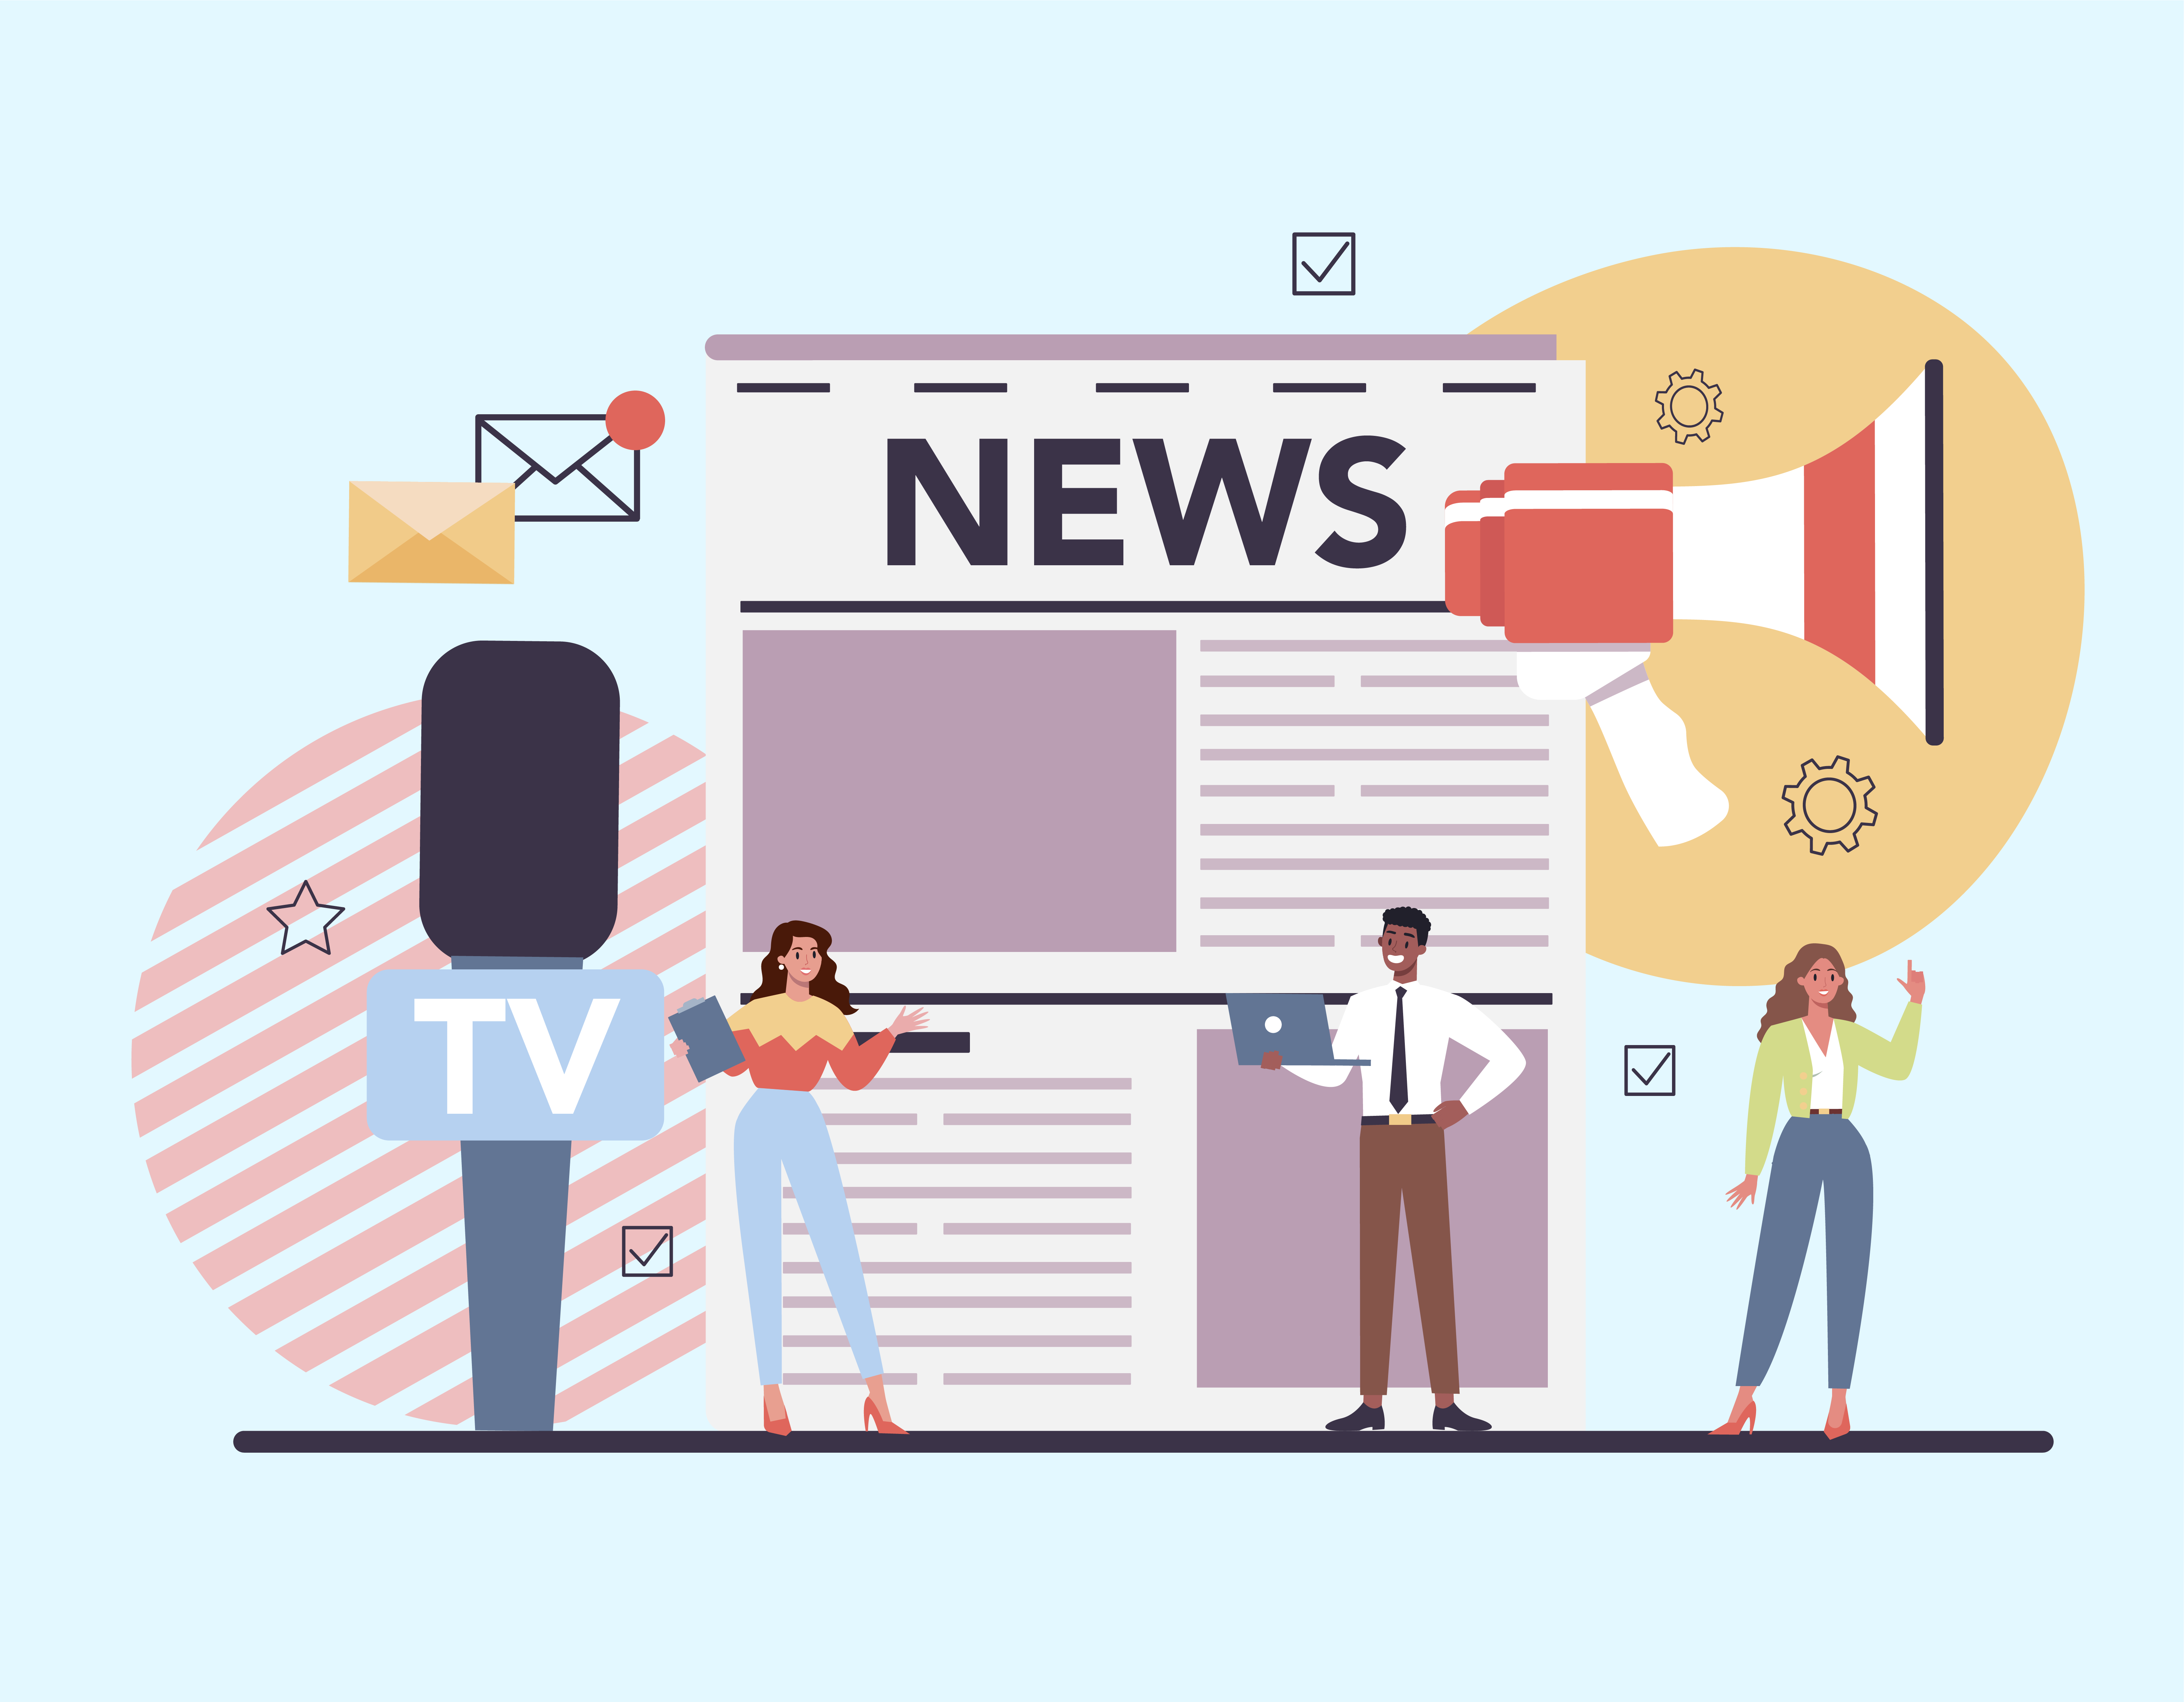 How to pitch your press release to journalists